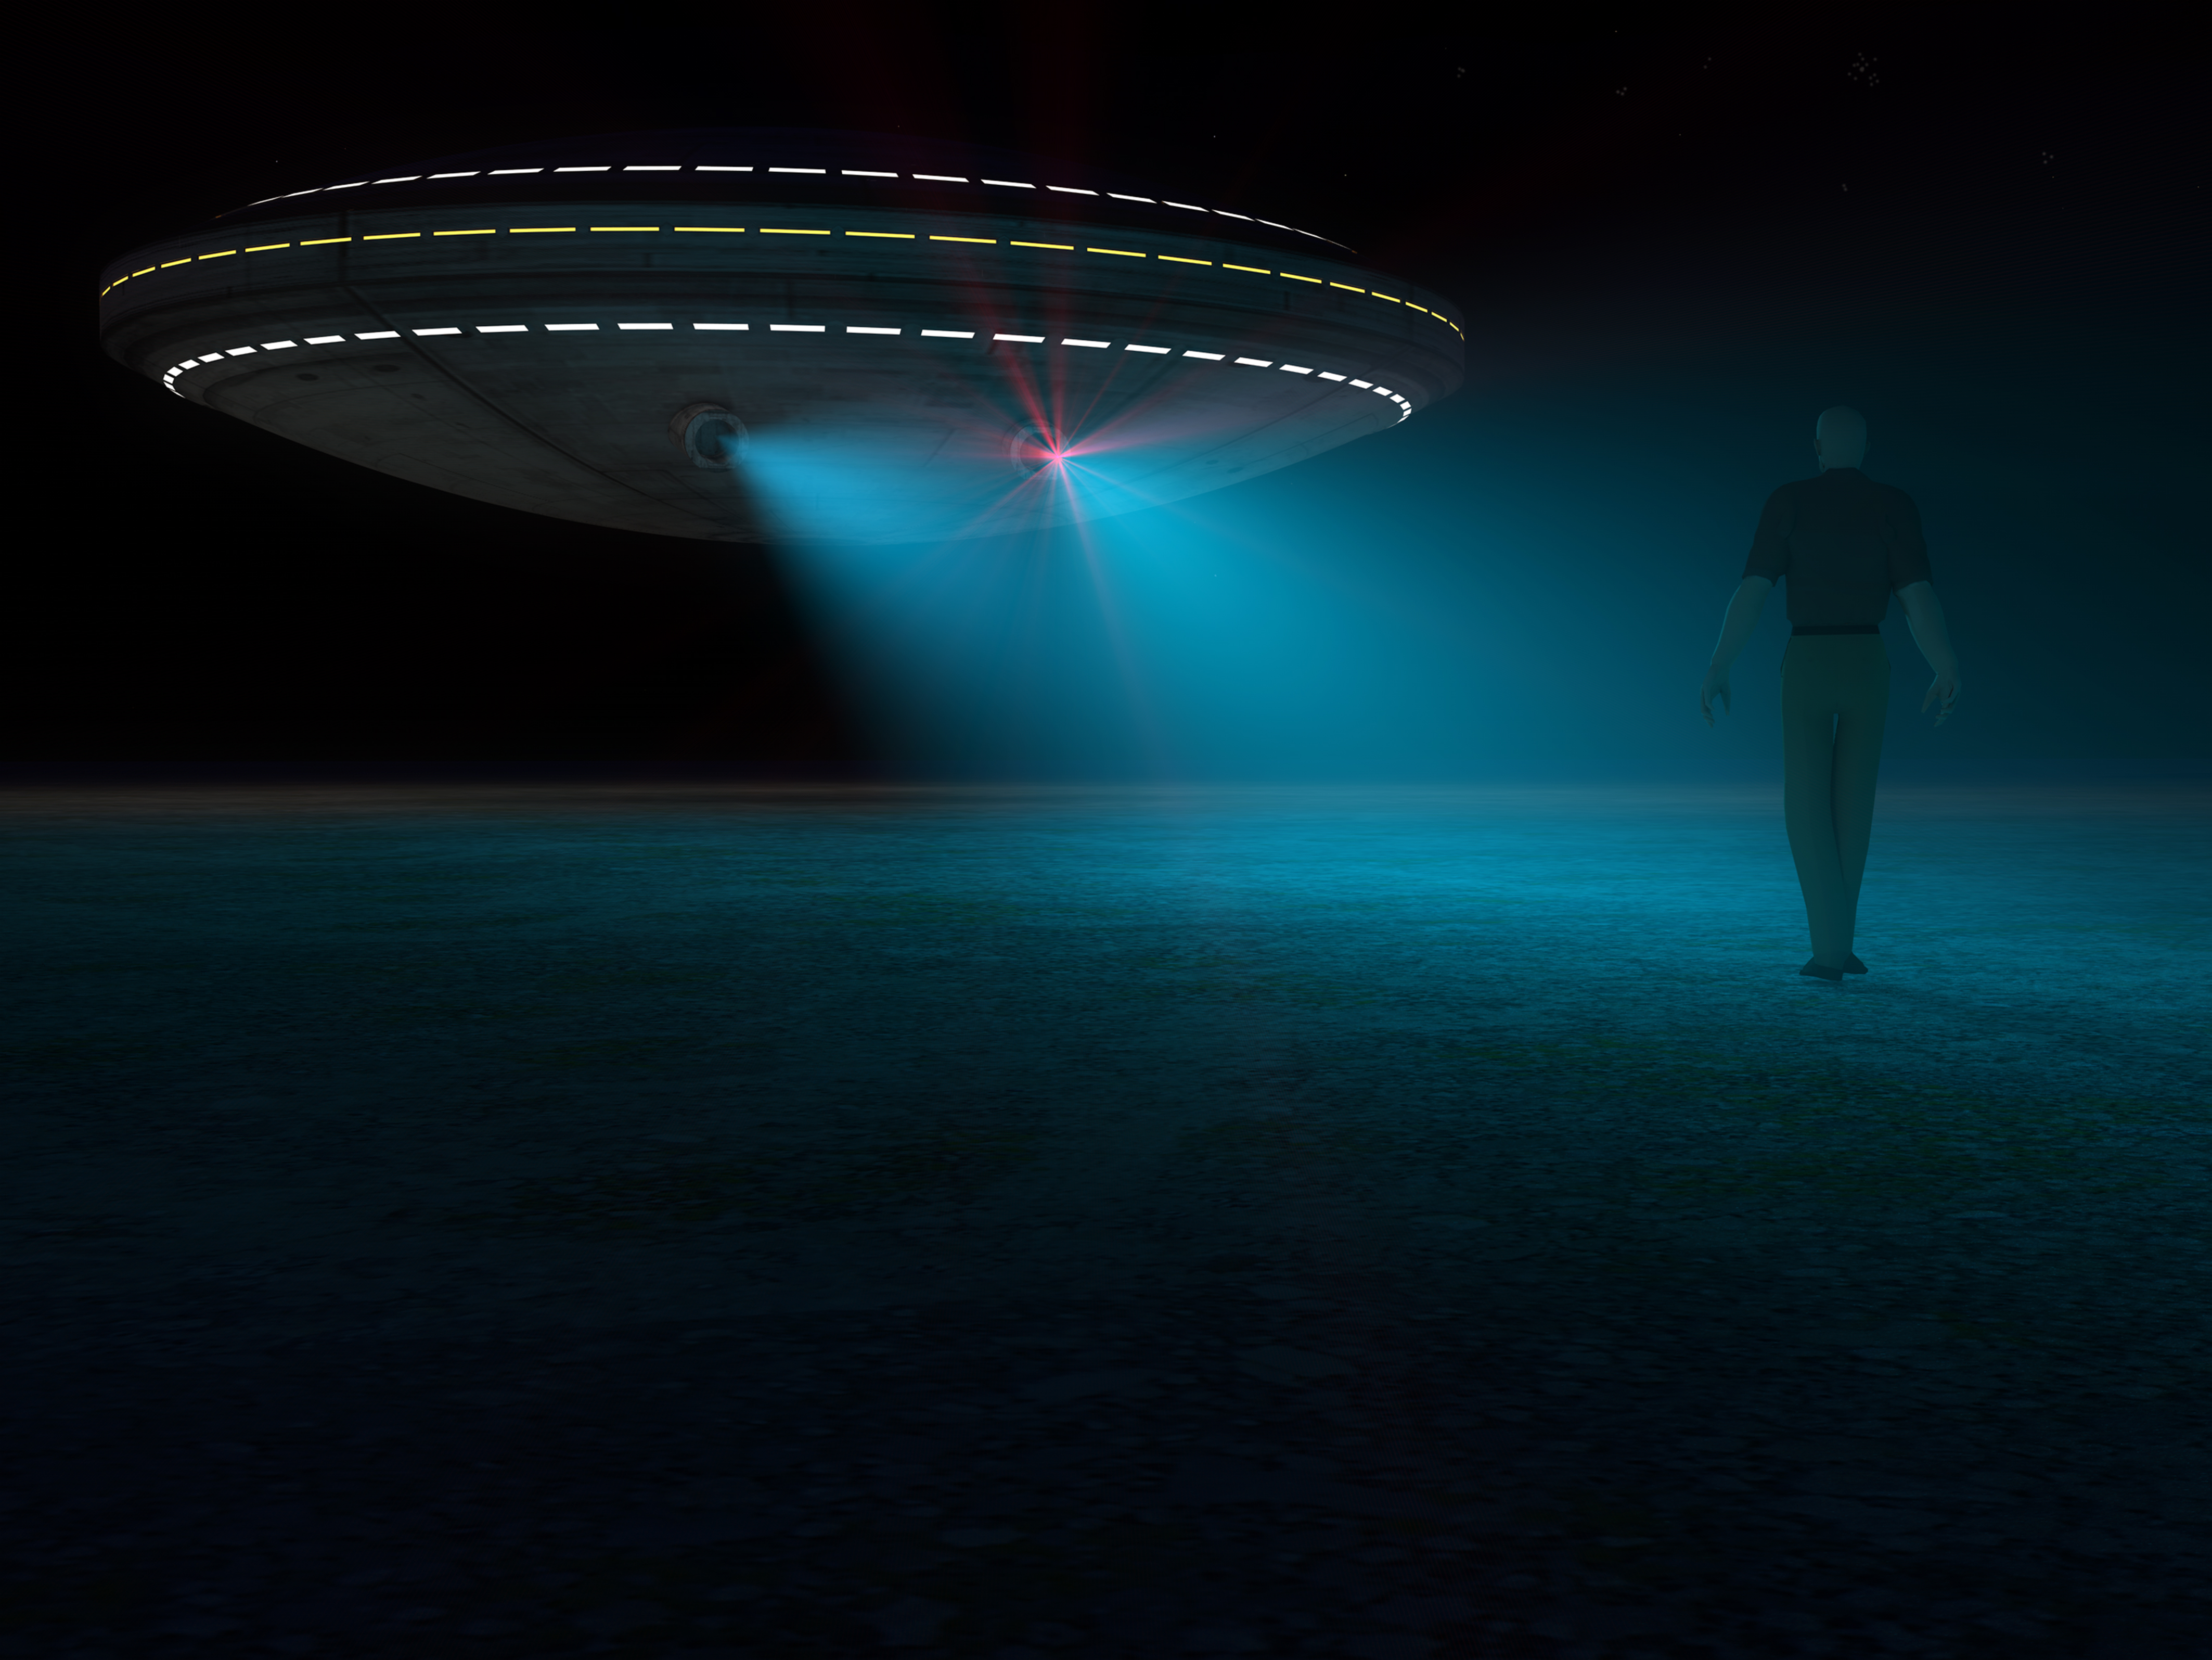 Ufo attacking and abducting